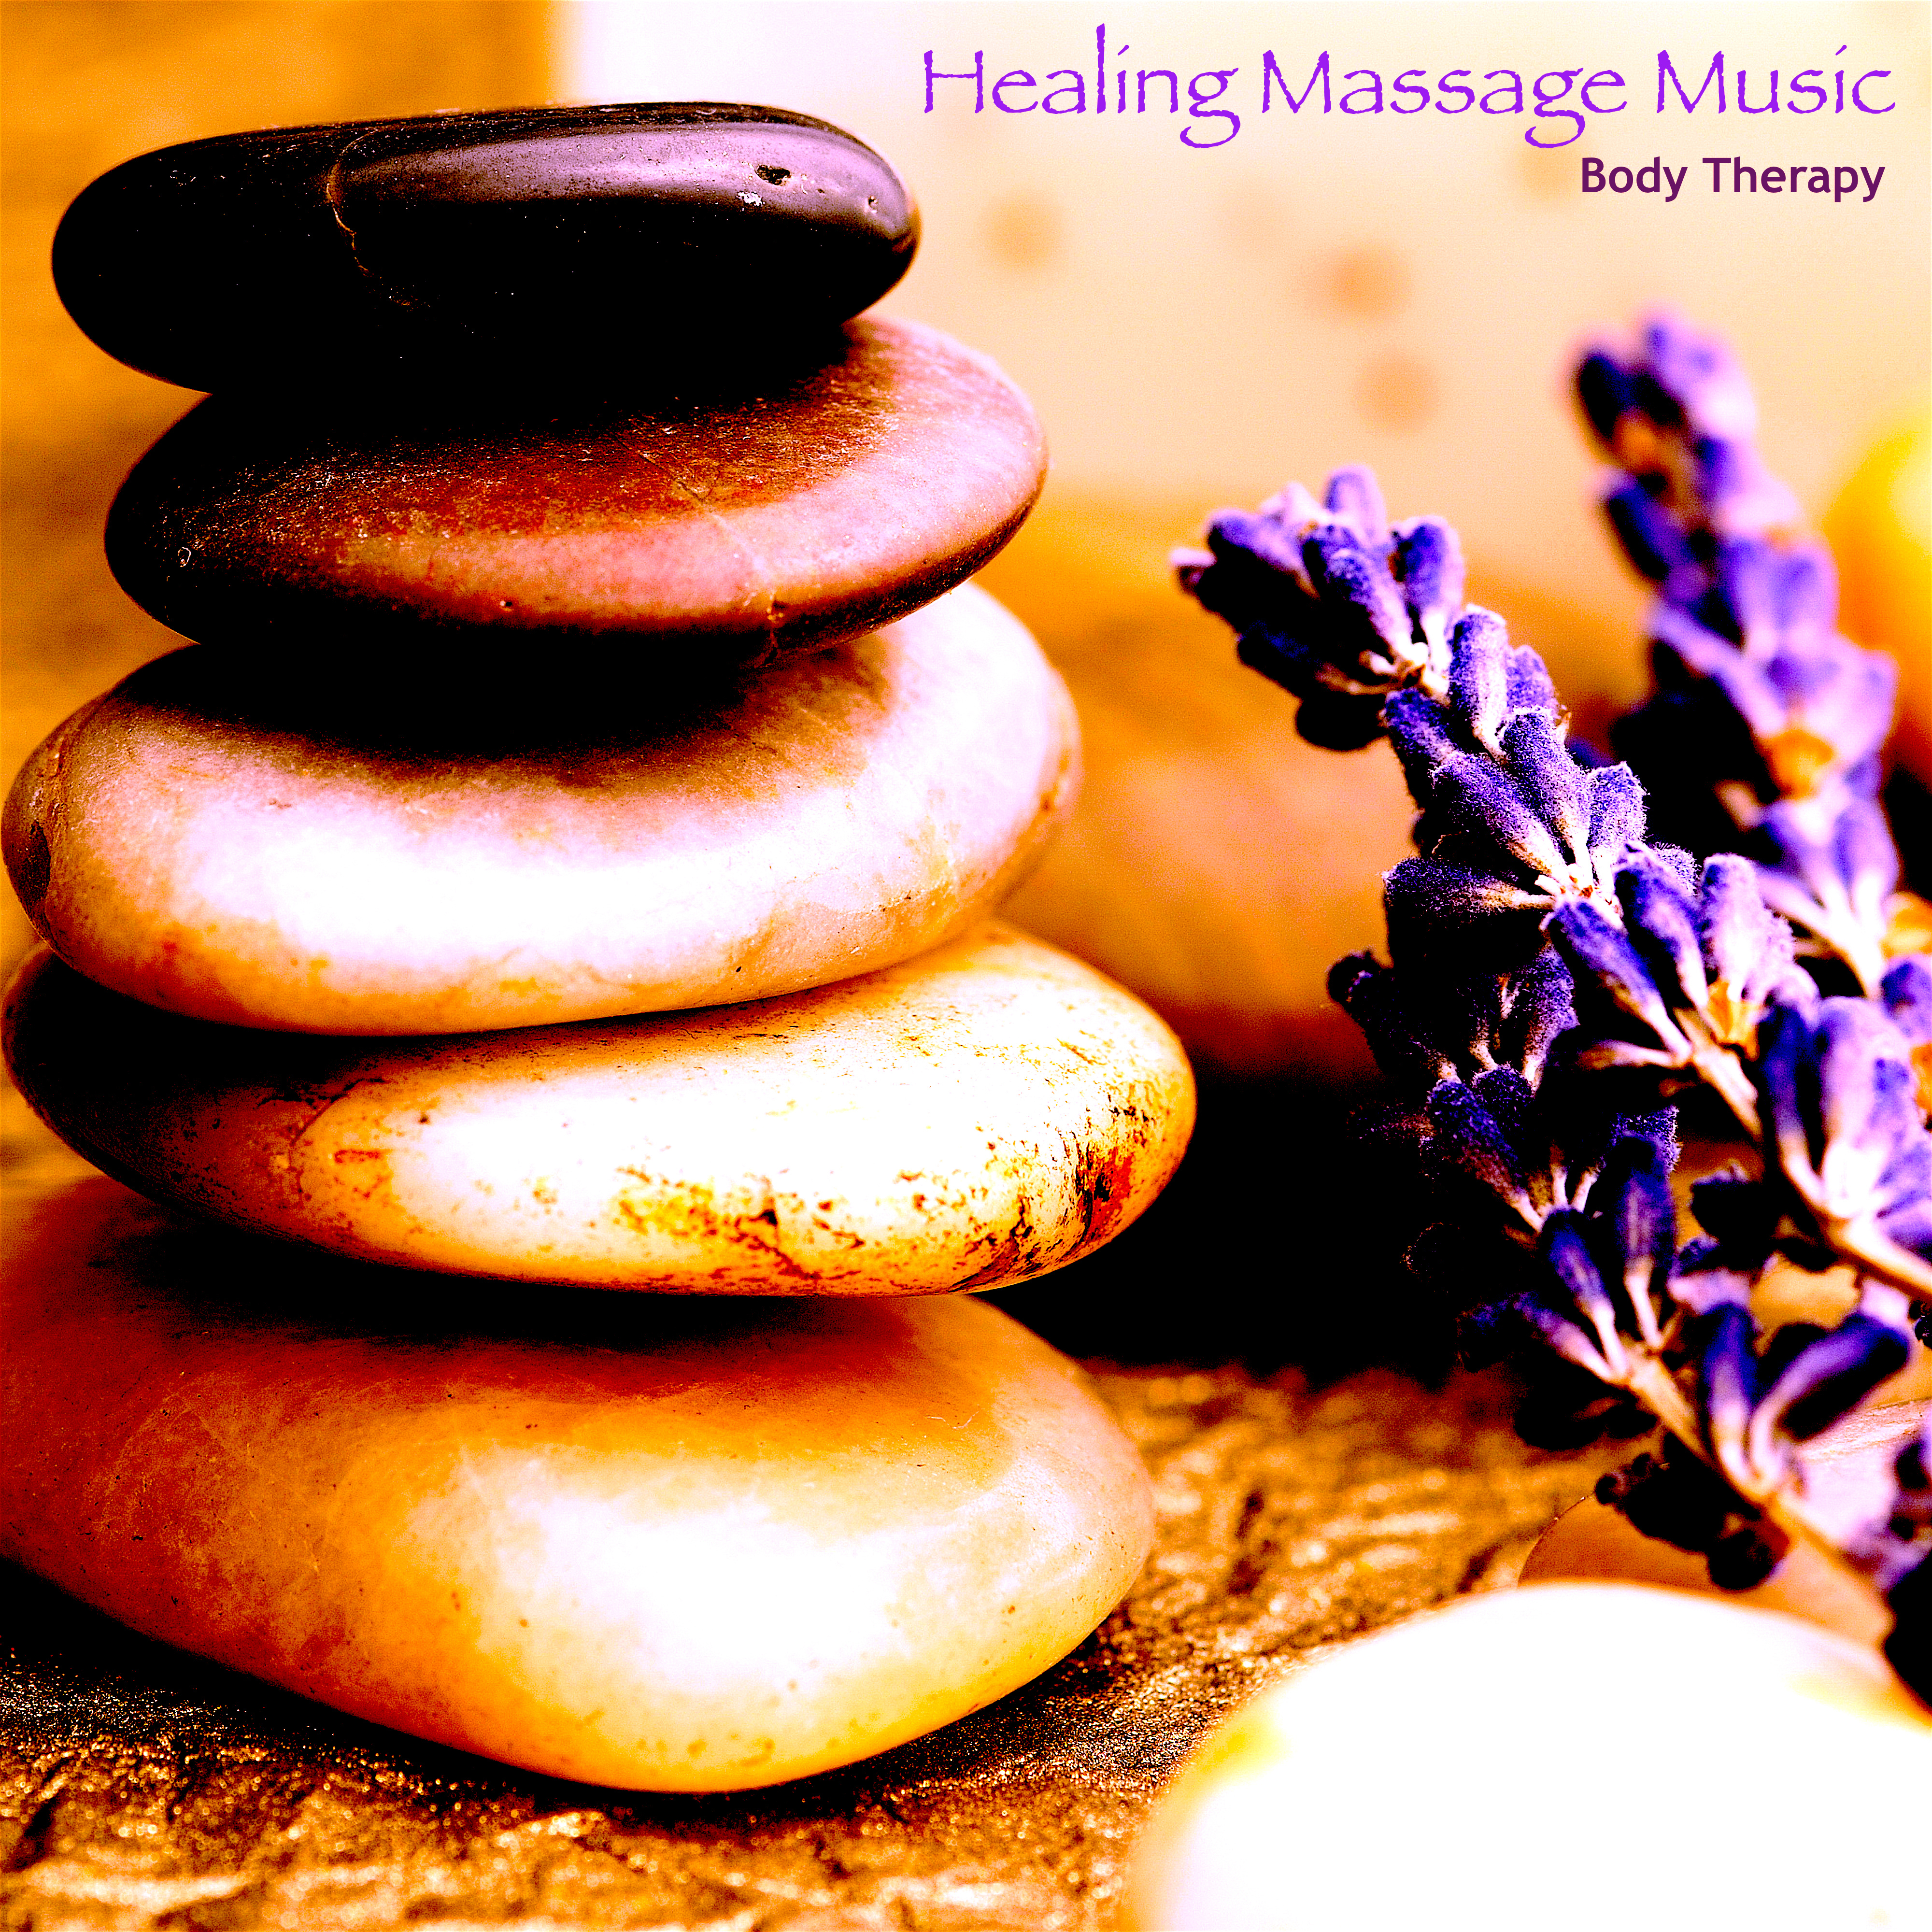 Healing Massage Music - Body Therapy, Massage Oil, Aromatherapy for Wellness Centers